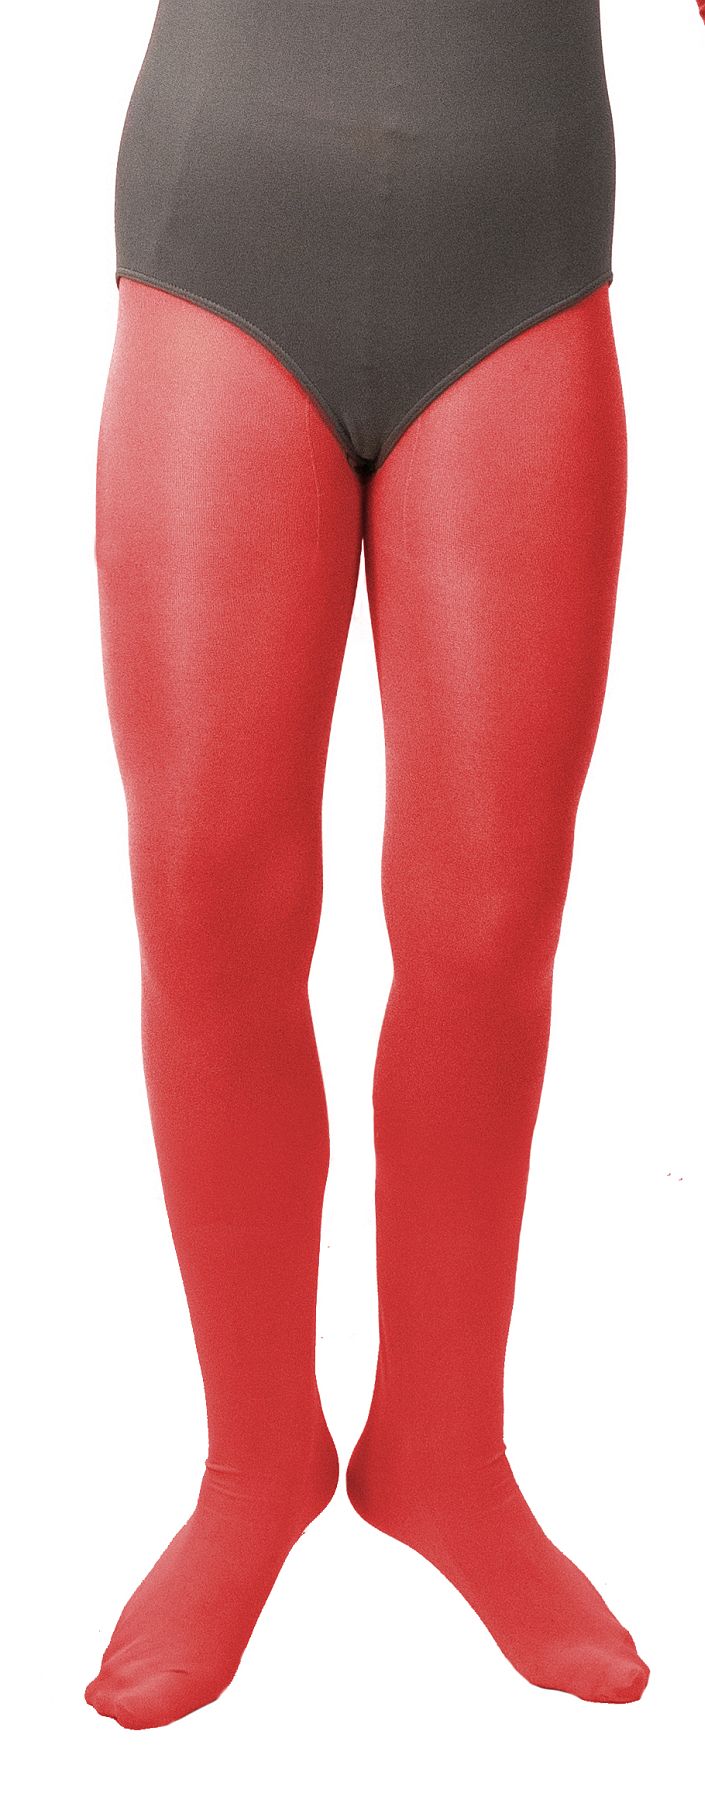 Opaque tights, red